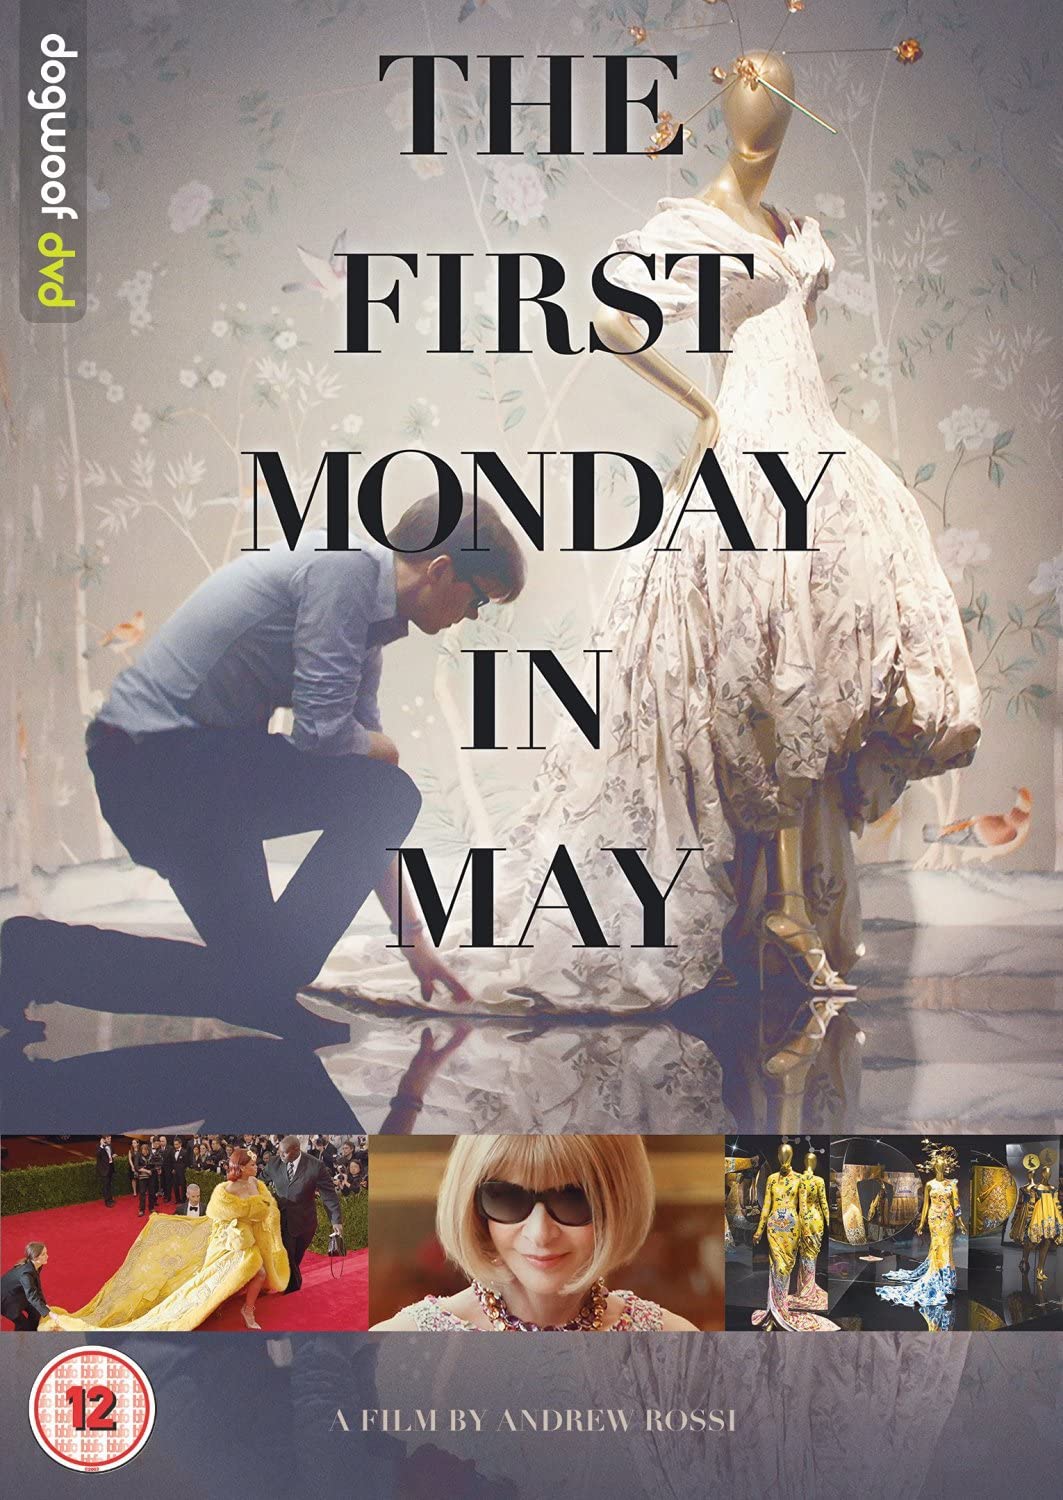 The First Monday in May - Documentary [DVD]